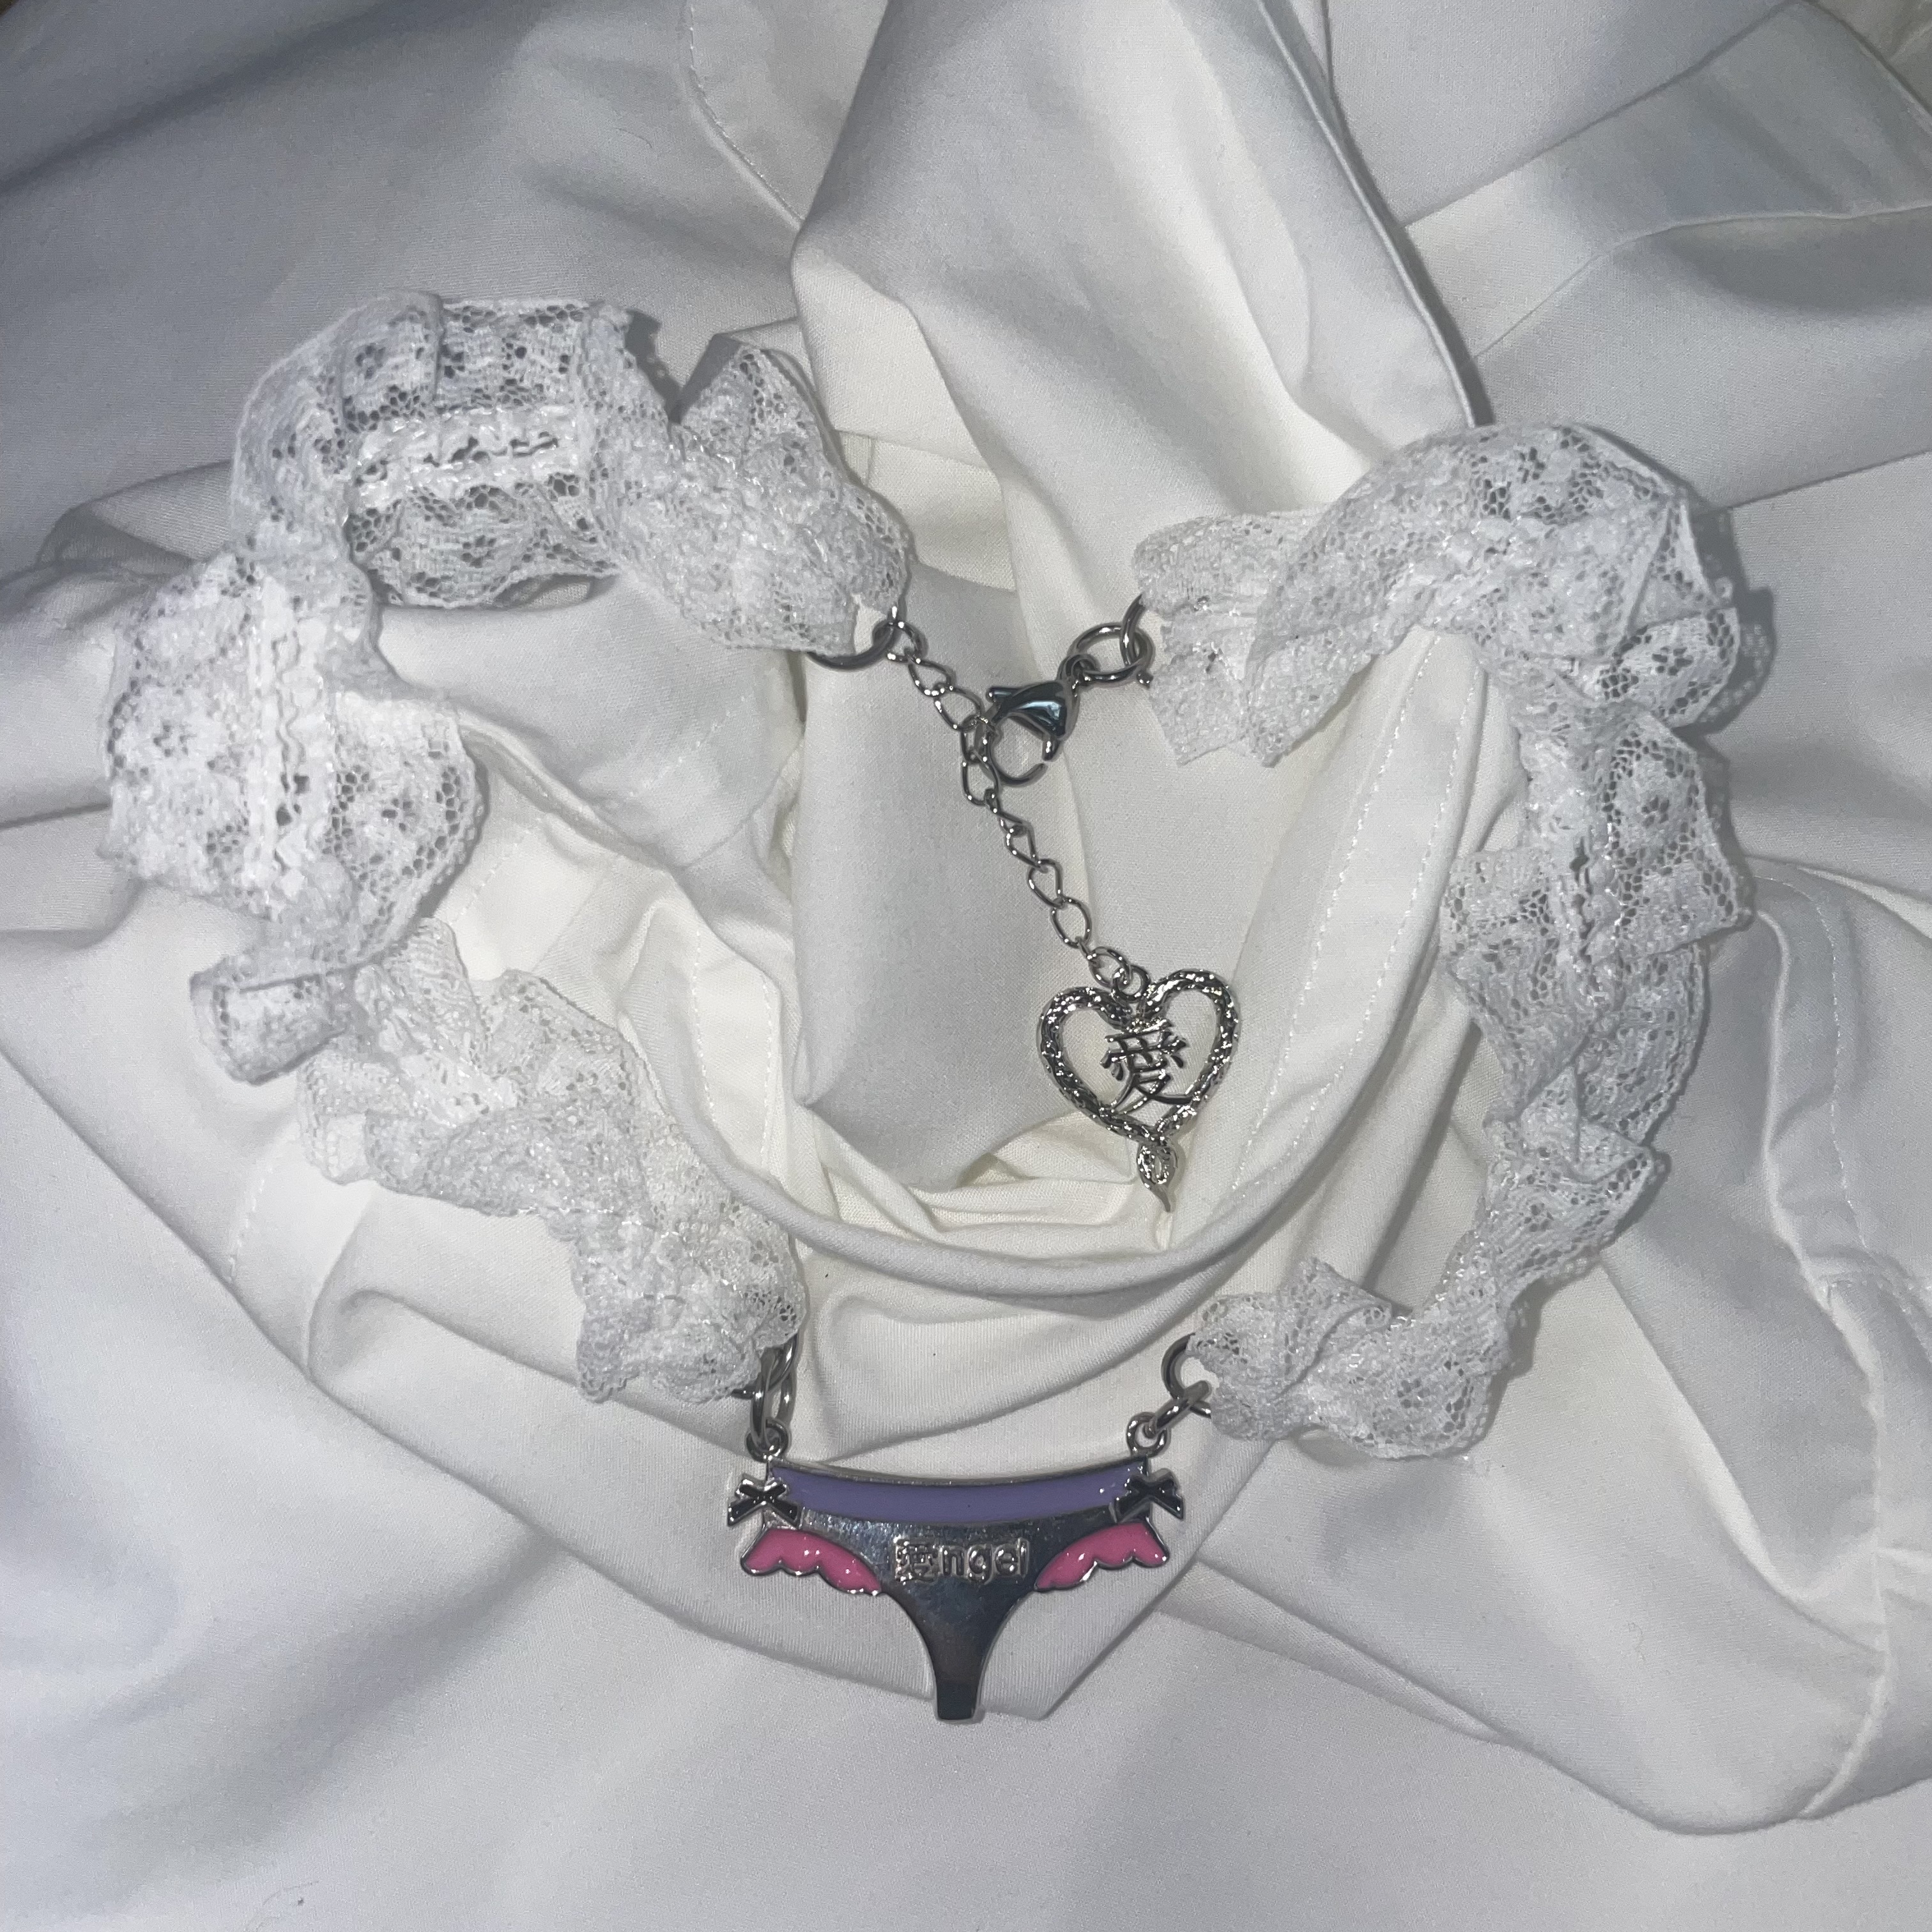 Angel lace necklace - White